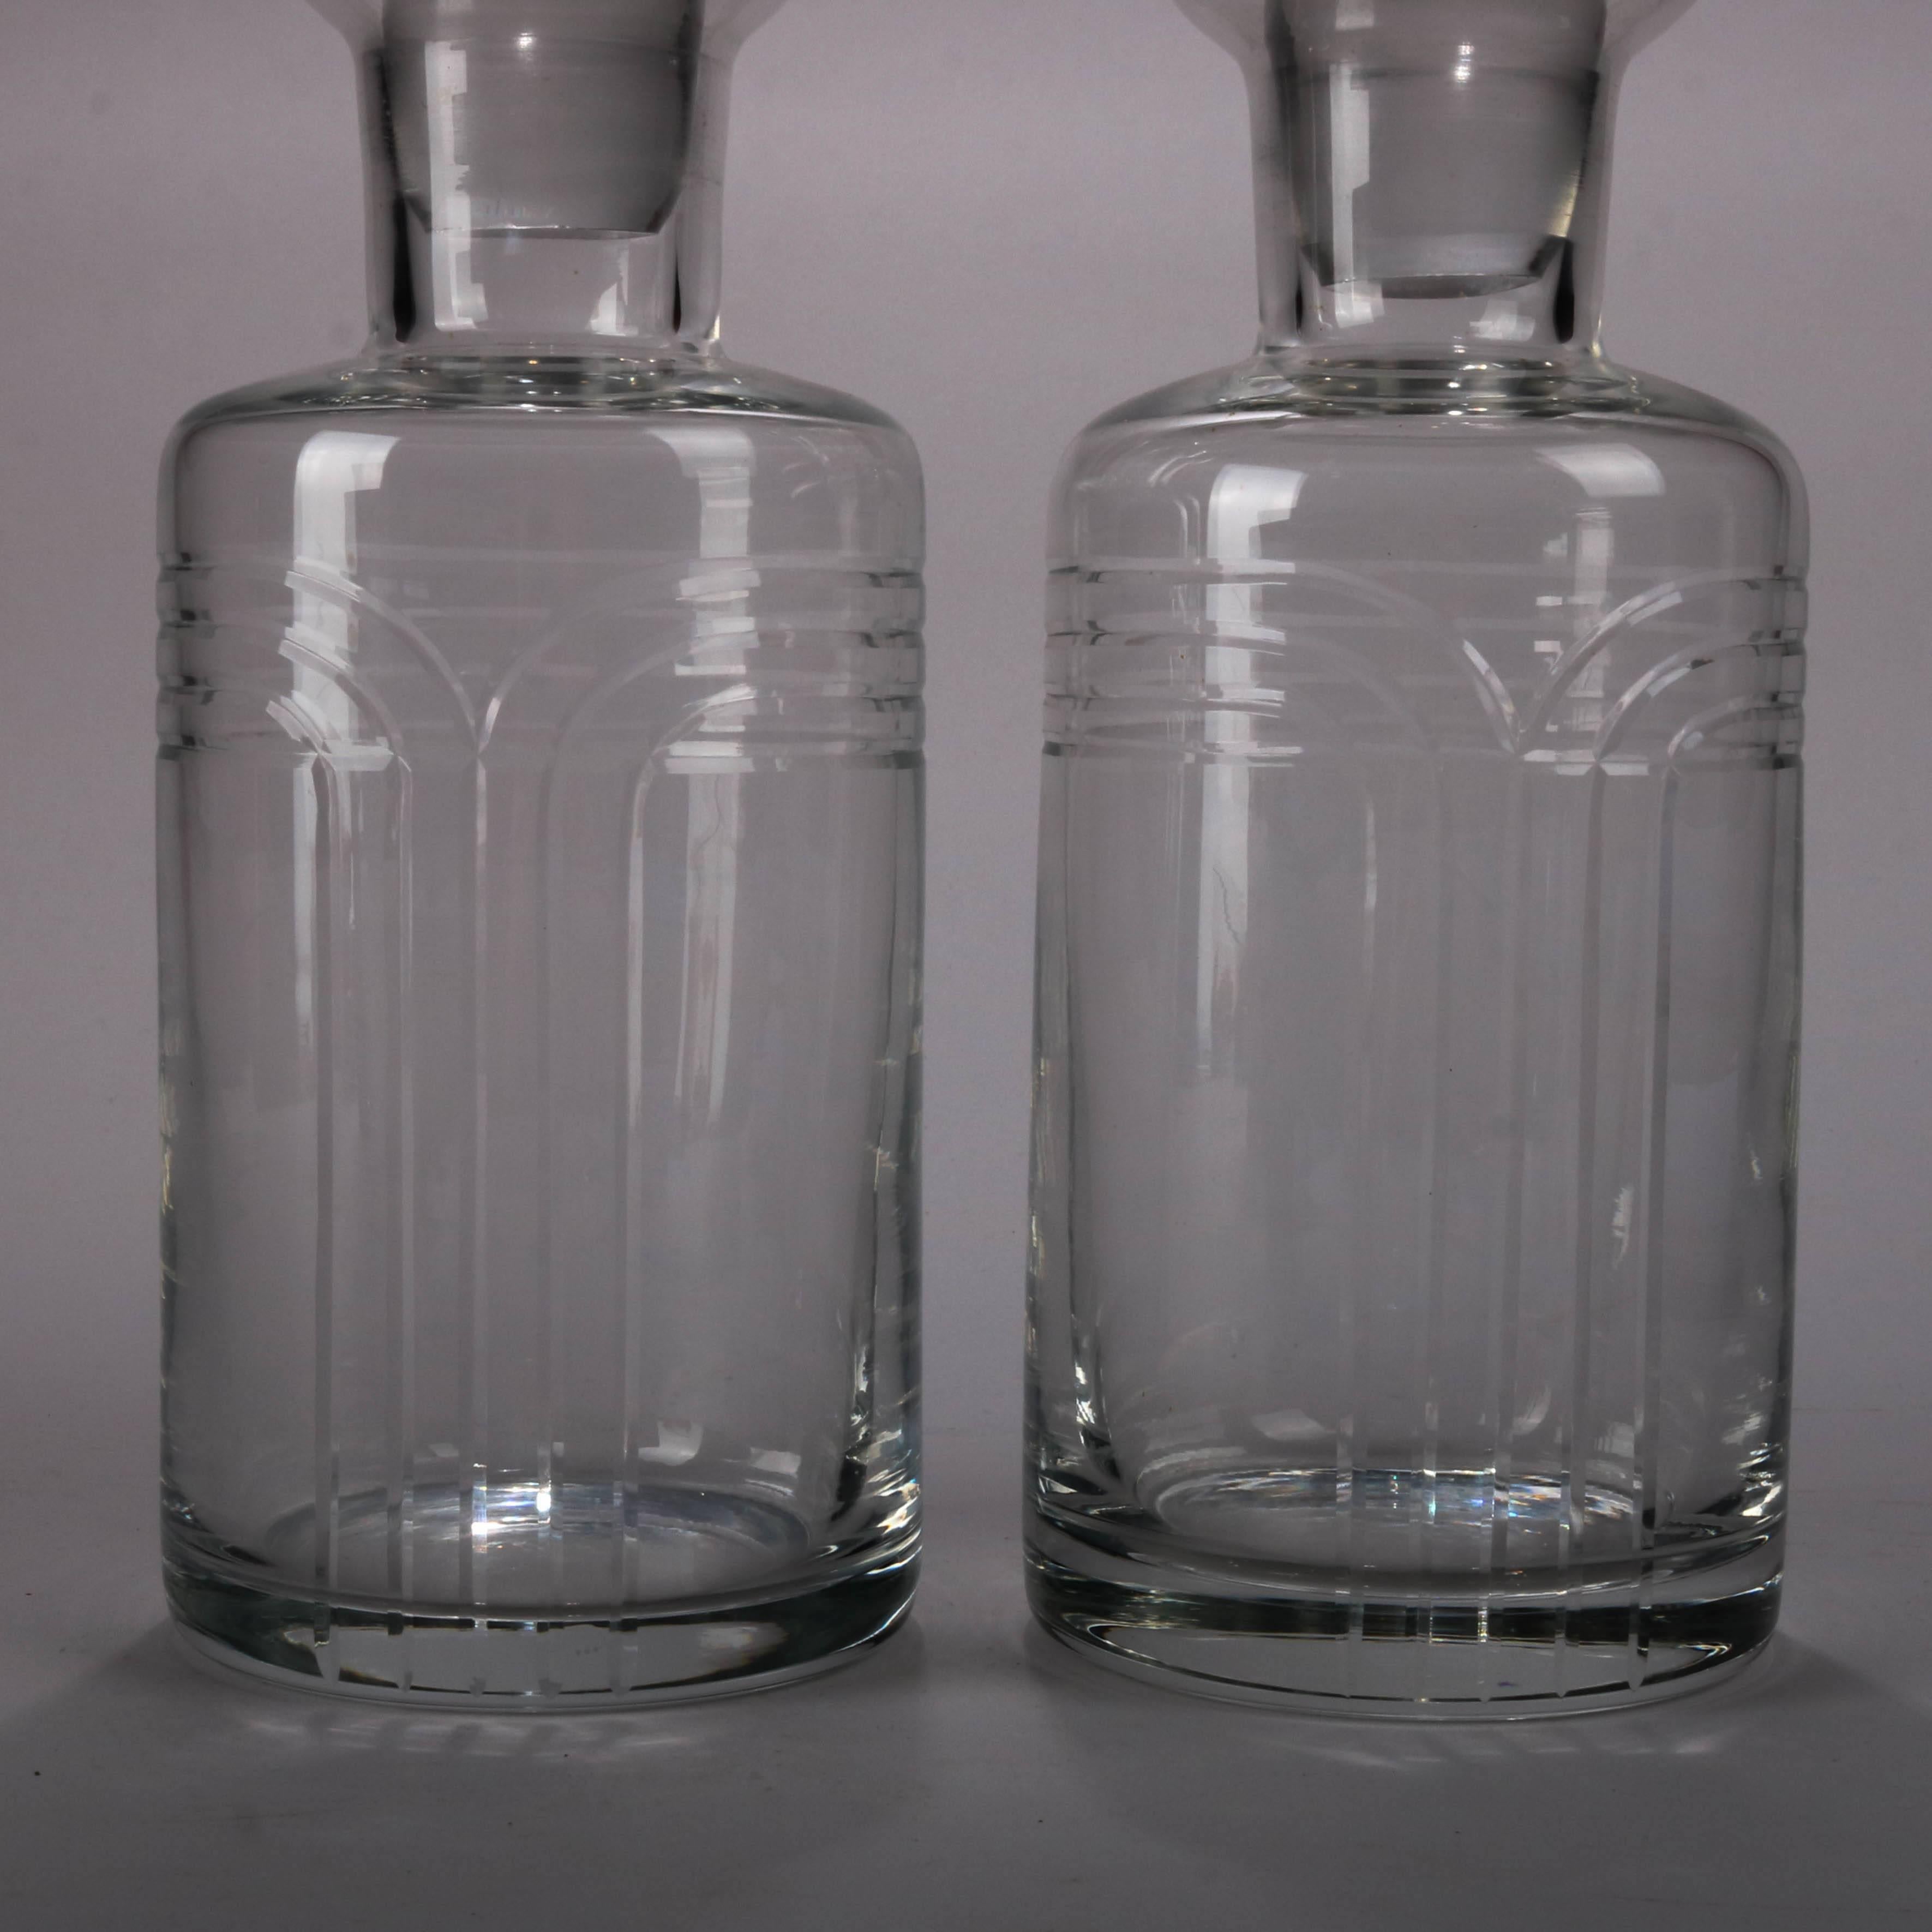 Pair of vintage French Baccarat School crystal decanters feature embossed geometric design and matching stoppers, 20th century

Measure: 12" height x 4" diameter.